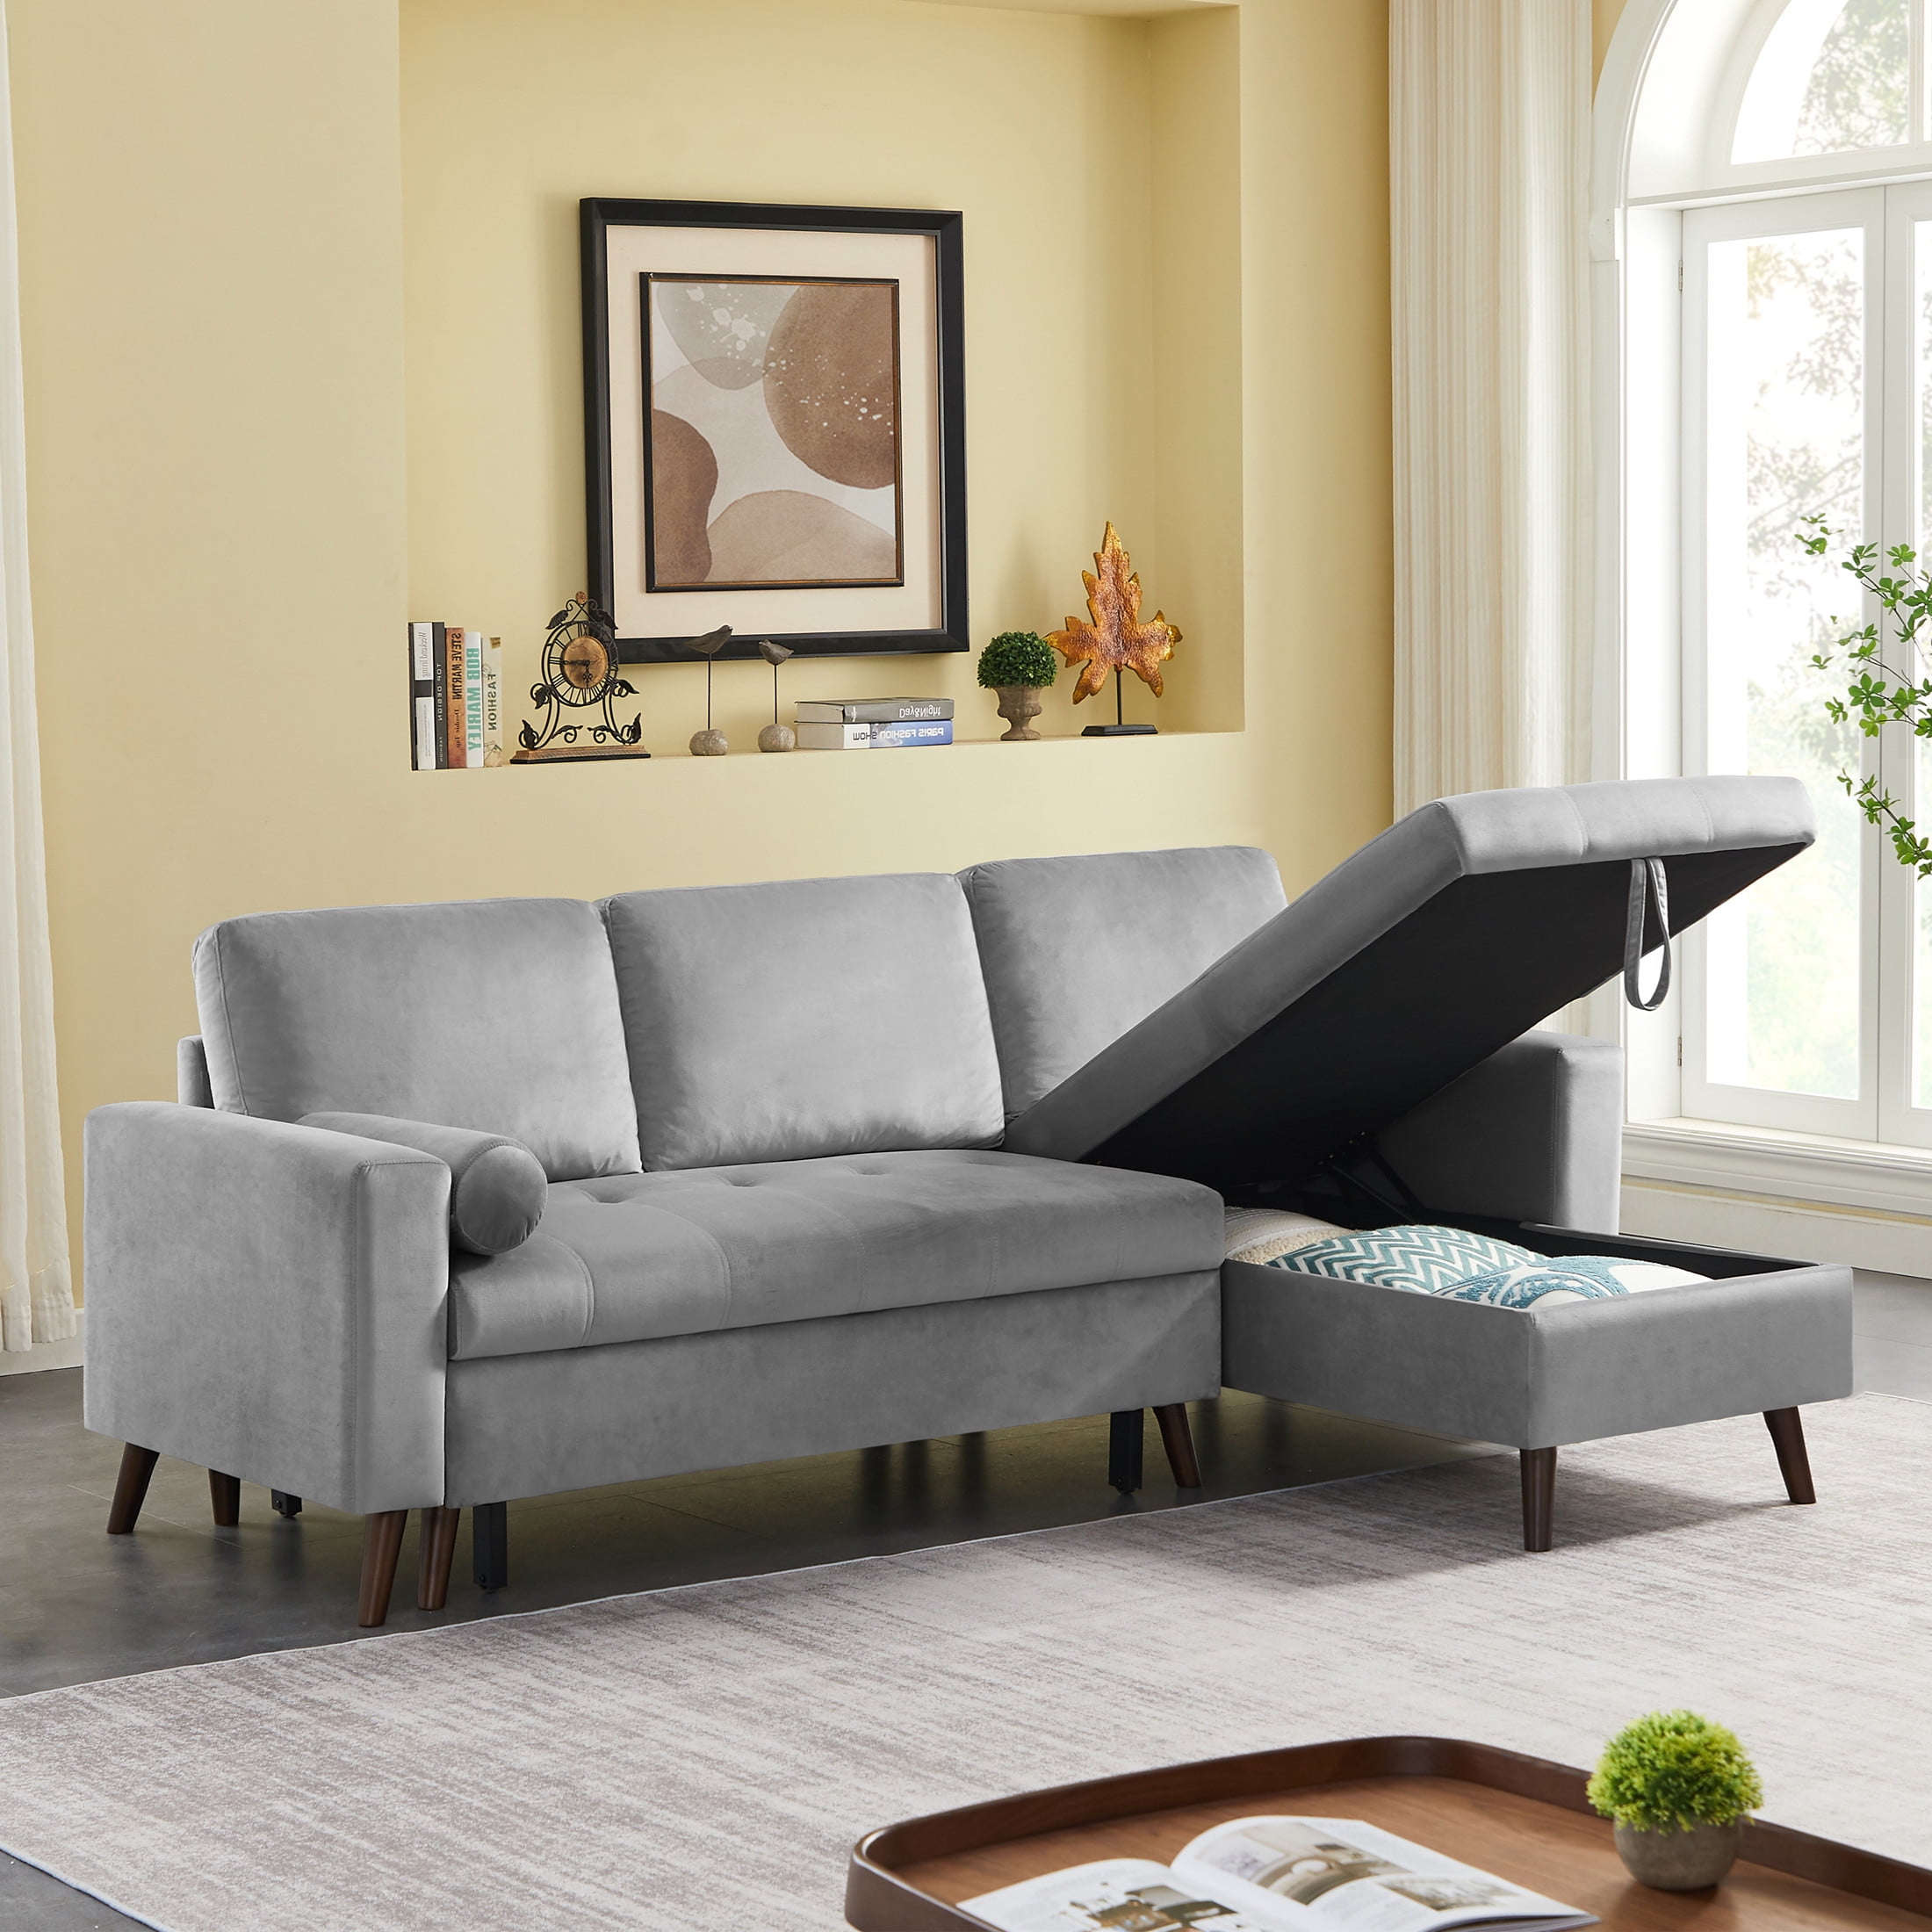 Aukfa 88 Sectional Sleeper Sofa Pull Out Bed With Storage Chaise For Living Room Velvet Gray Com